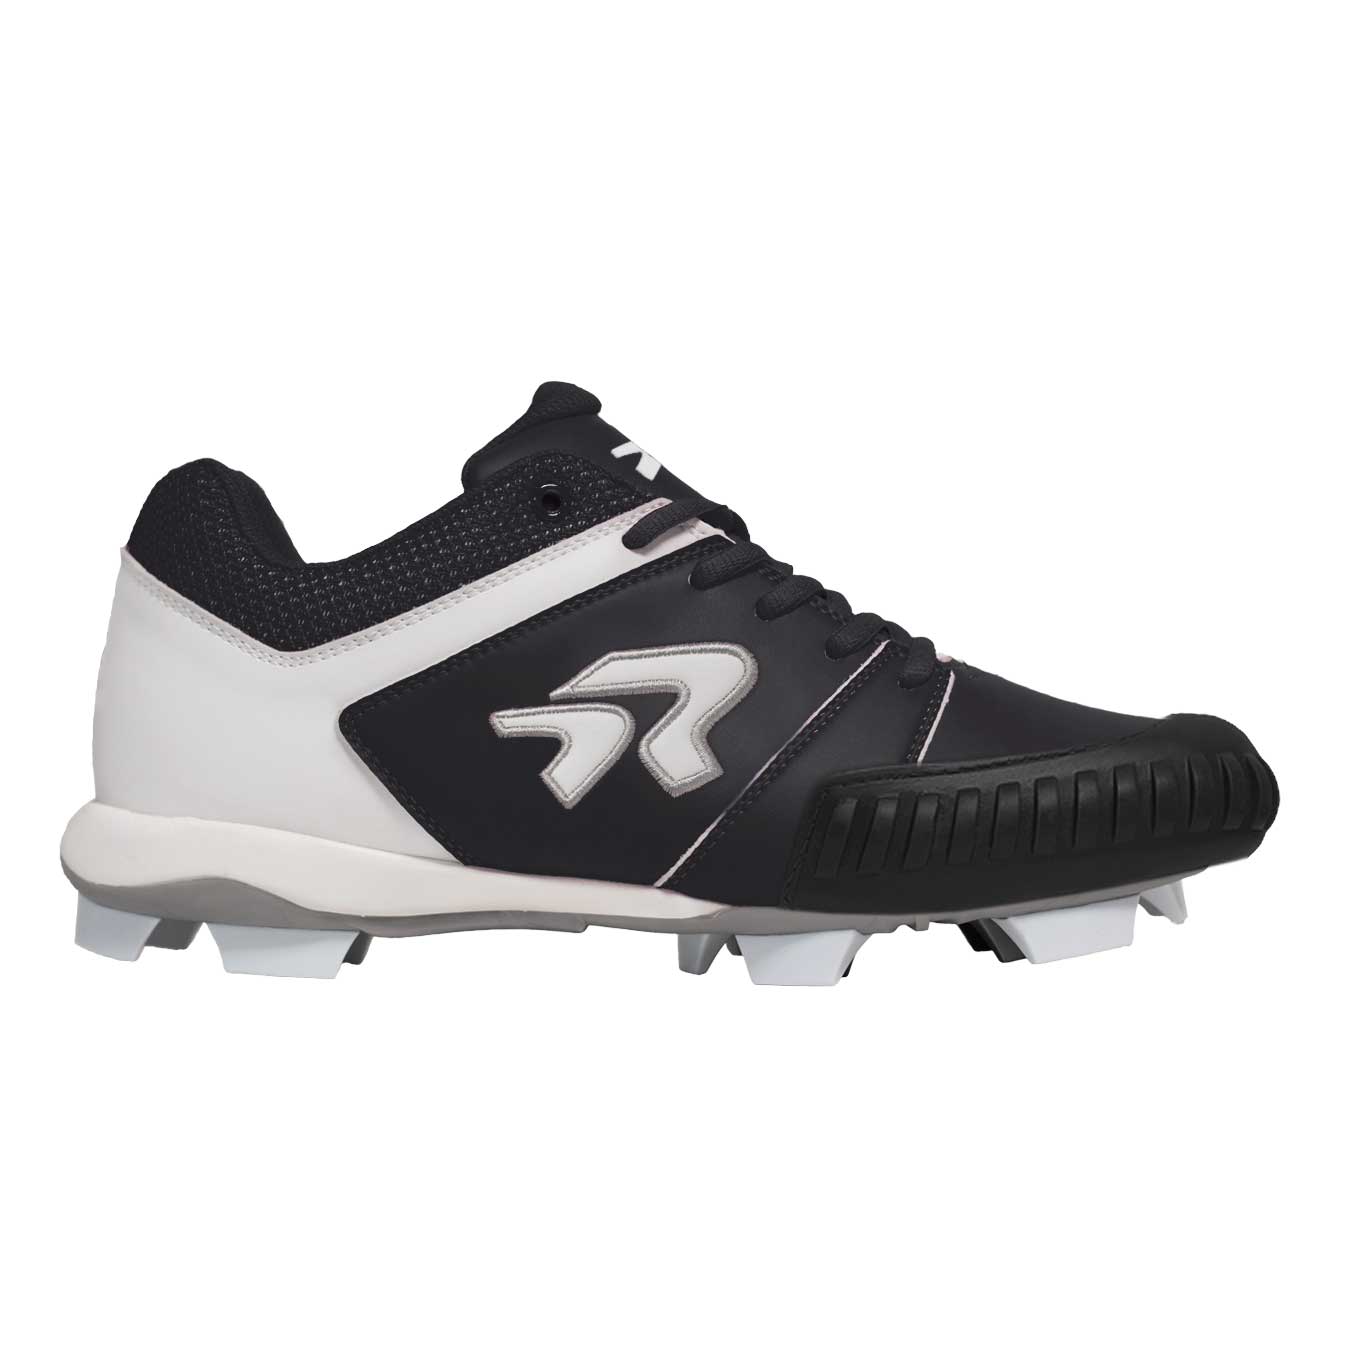 Ringor Flite Cleat Womens Molded with Protective Toe